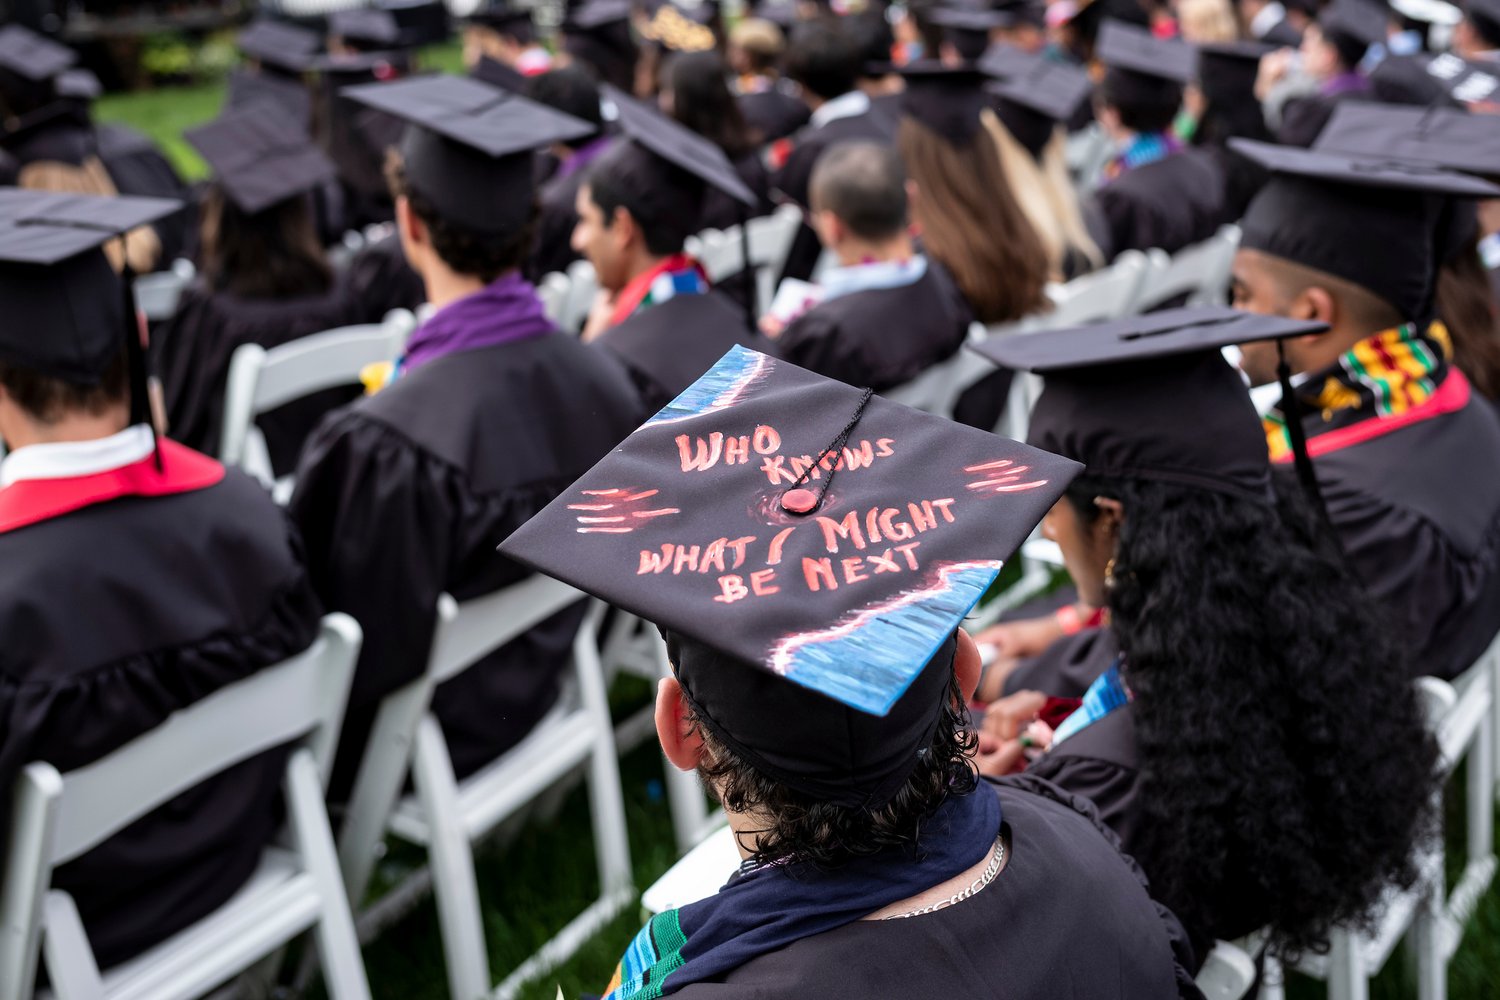 Students seated with graduation caps